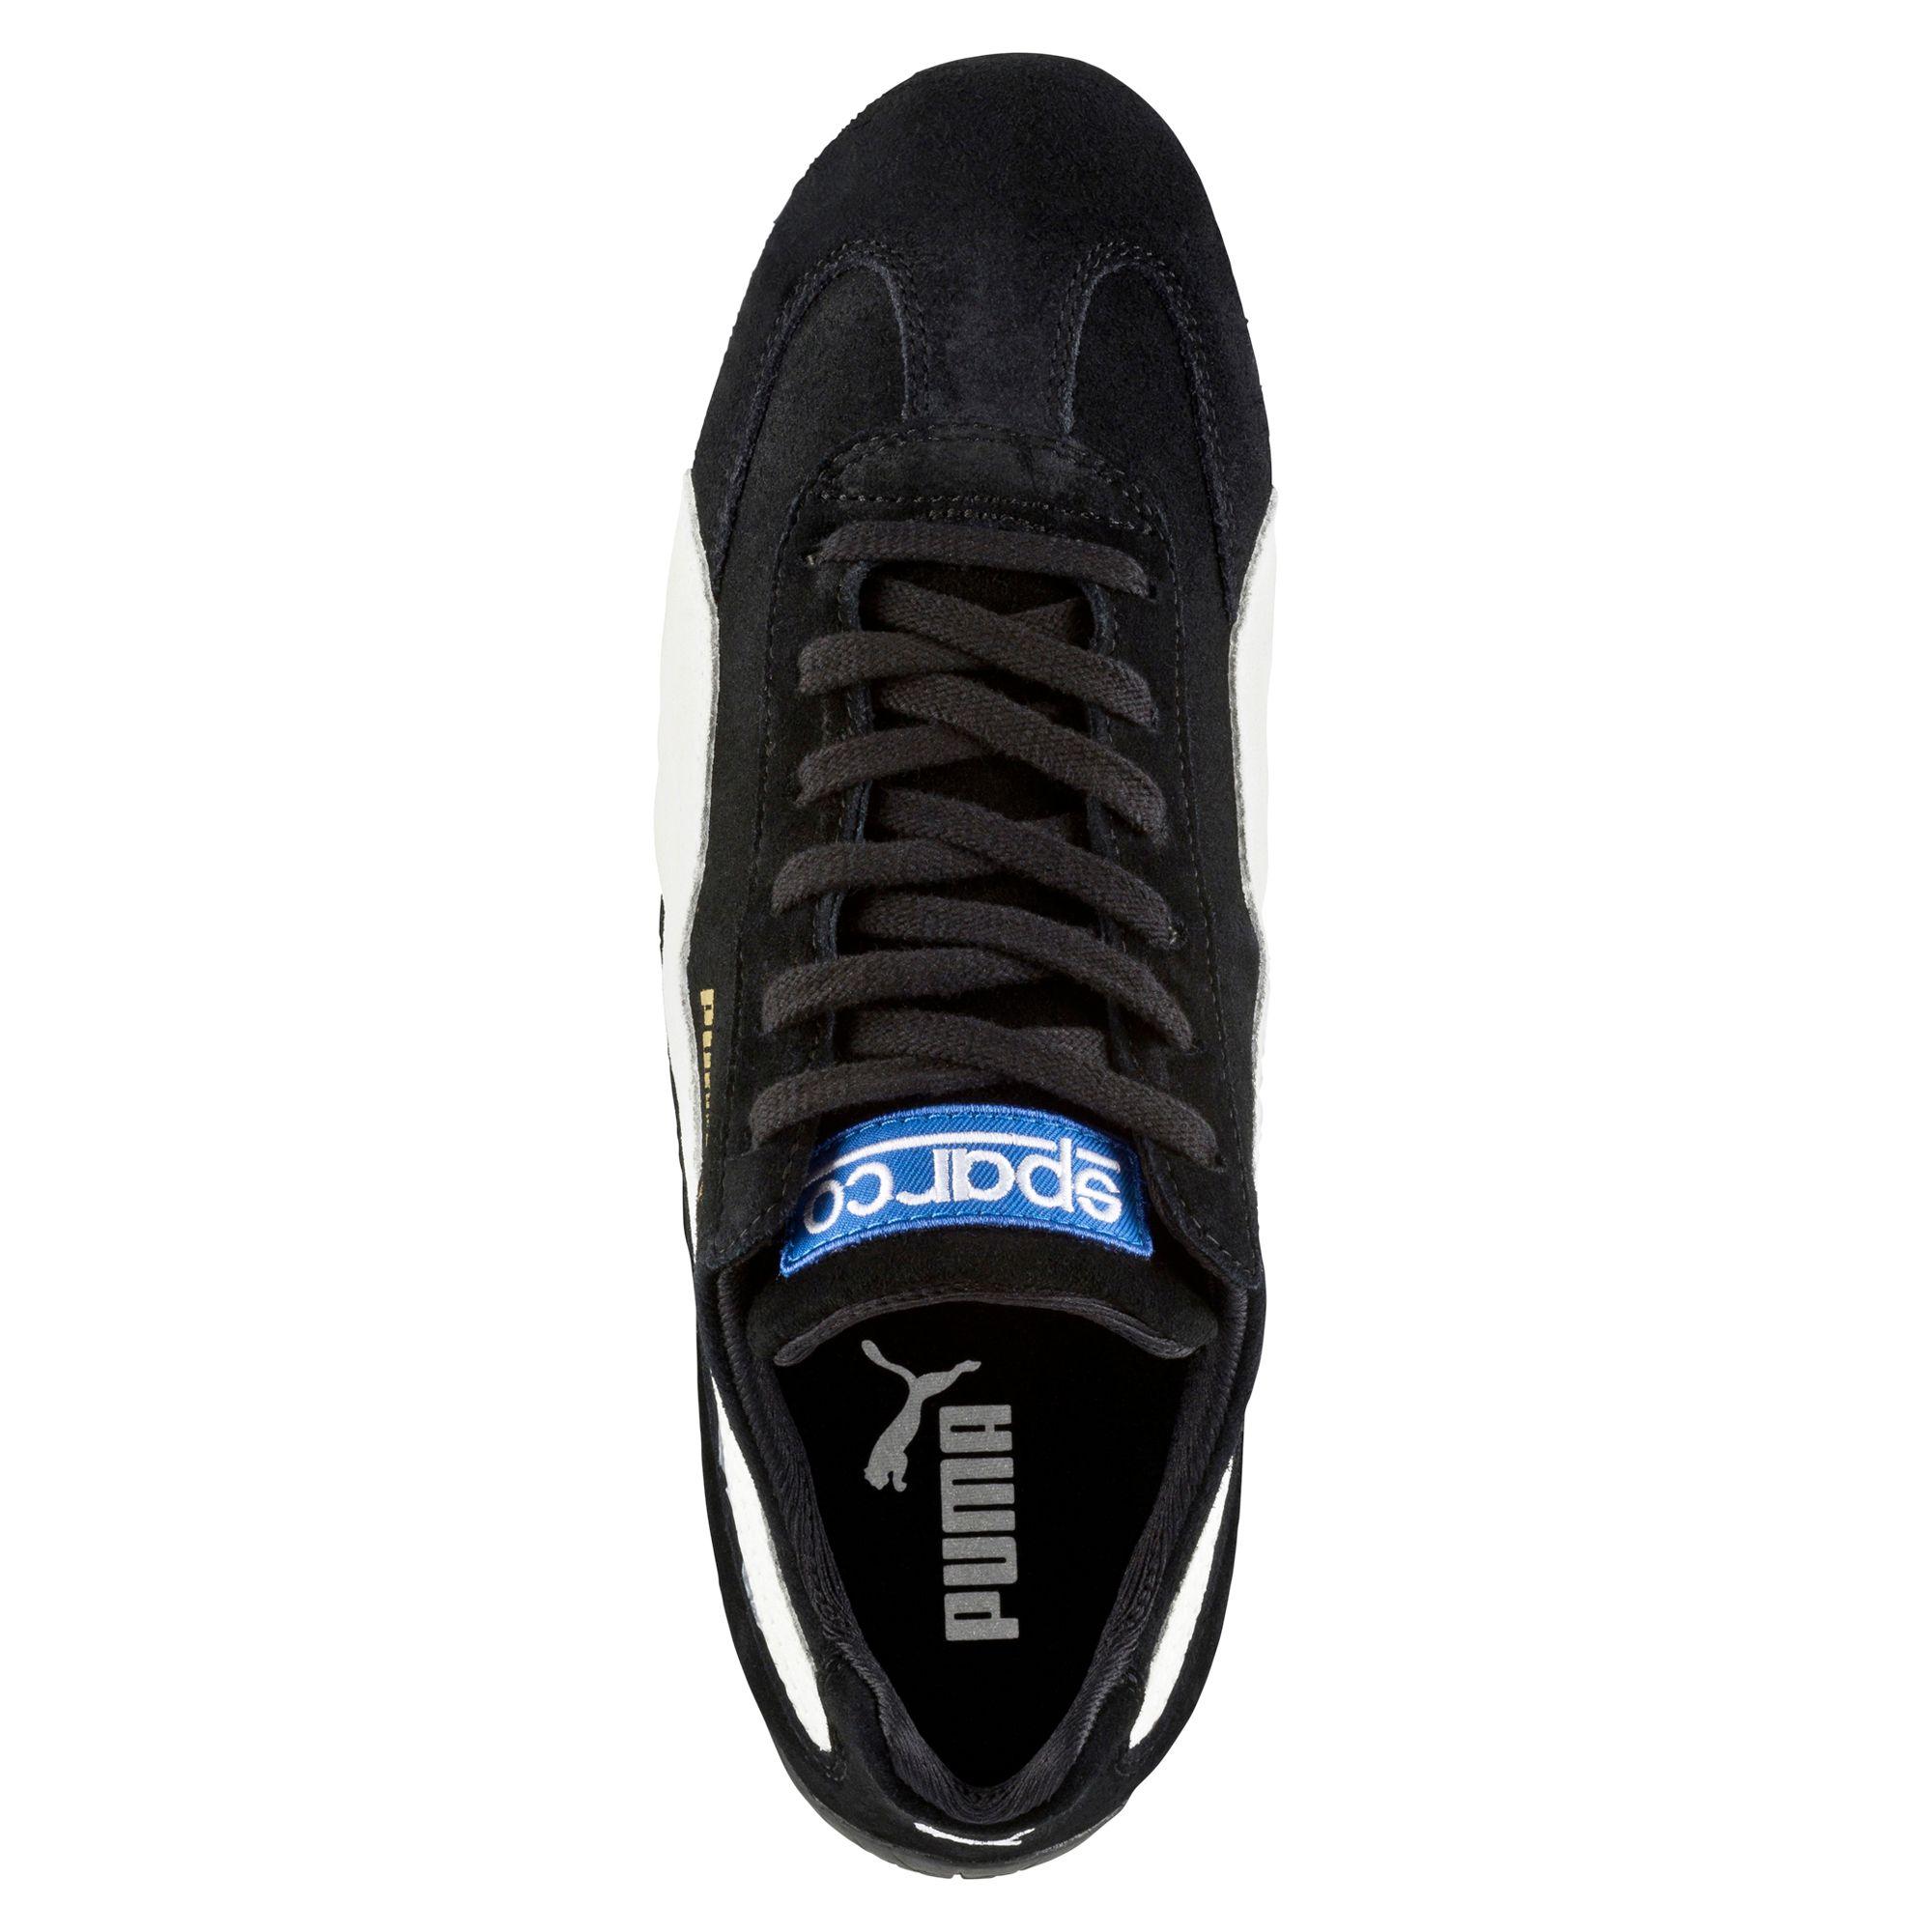 PUMA Suede Speed Cat Sparco Shoes in Black-White (Black) for Men - Lyst